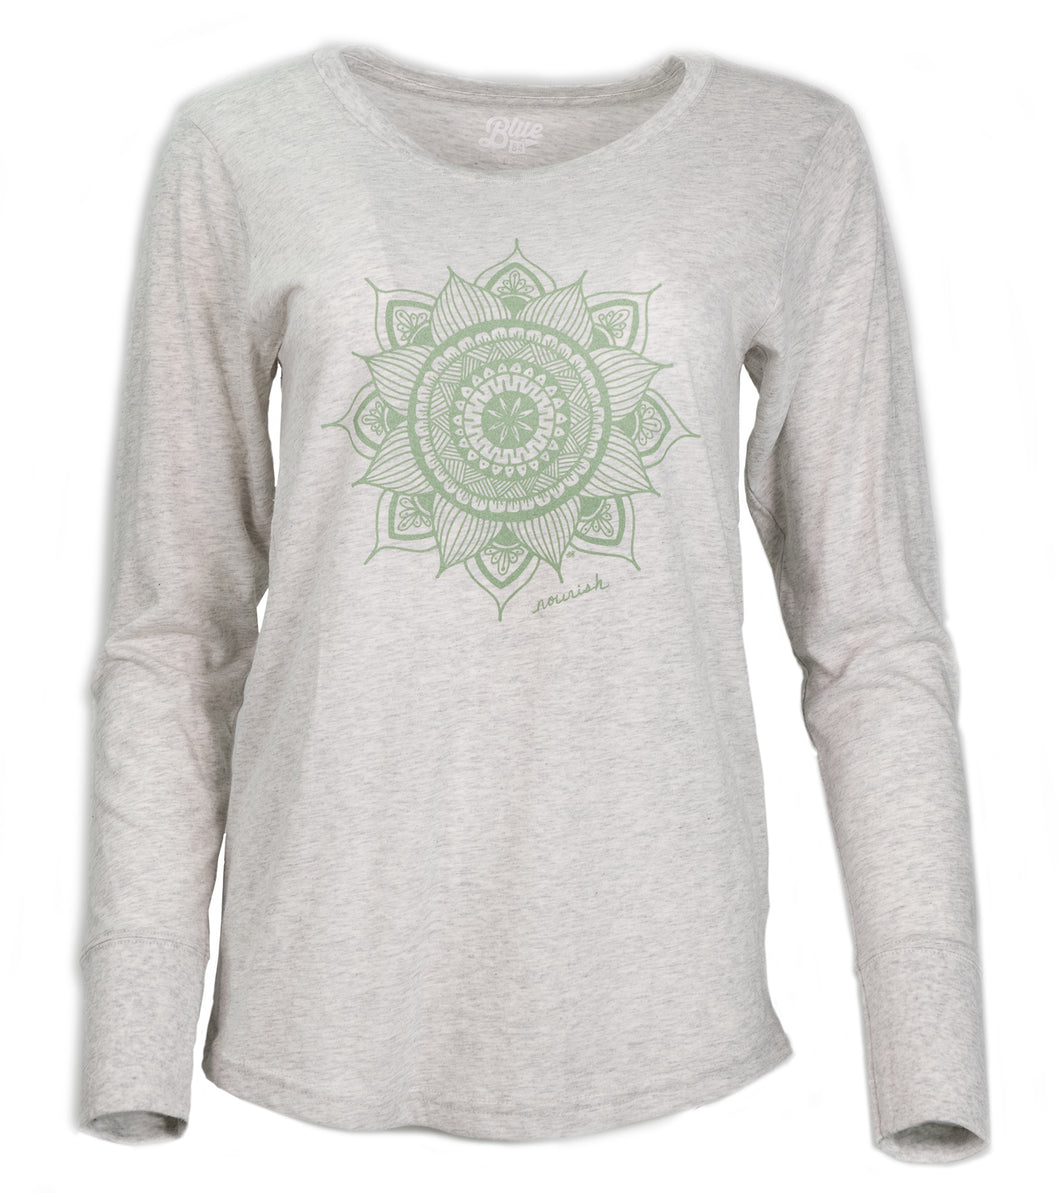 Product Image : Front View - Women's Long Sleeve Crew-neck Tee - Oatmeal with a large green mandala design in the center